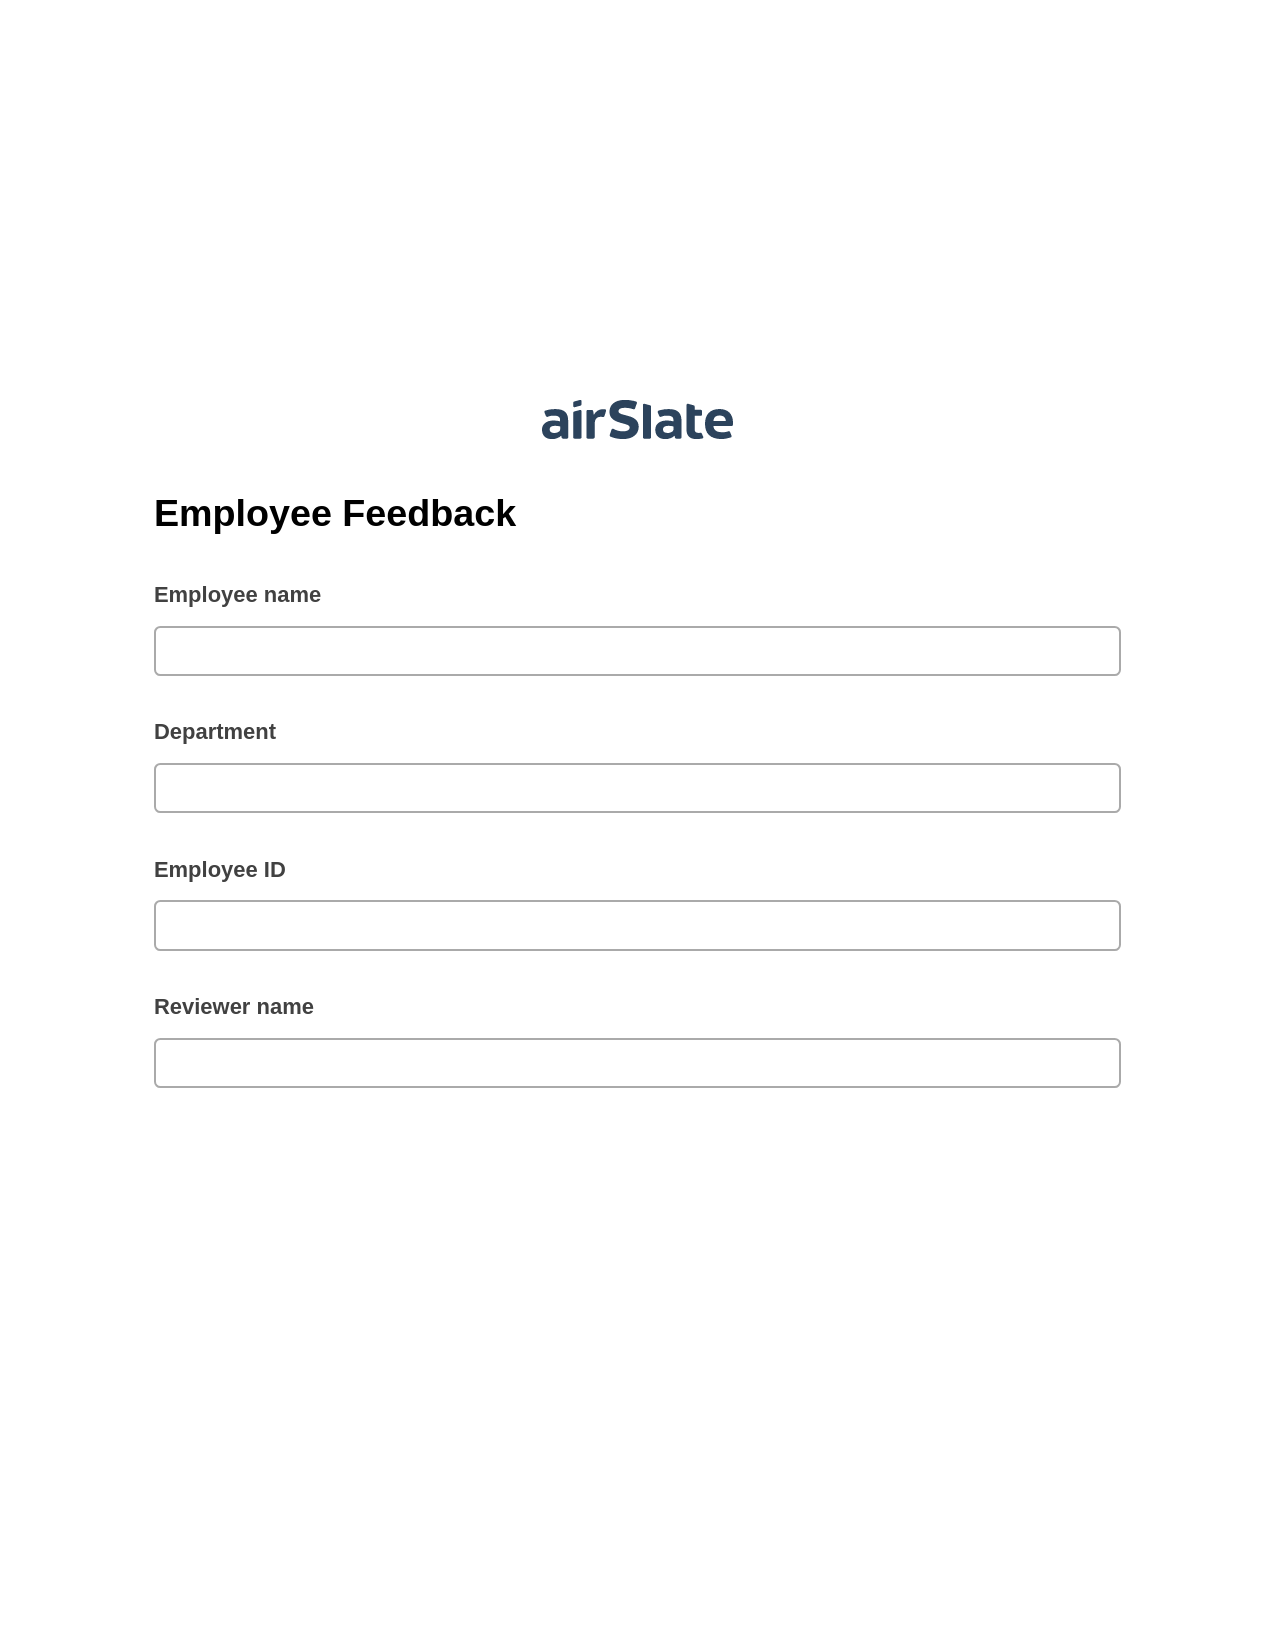 Employee Feedback Pre-fill from NetSuite Records Bot, Create slate bot, Export to NetSuite Record Bot